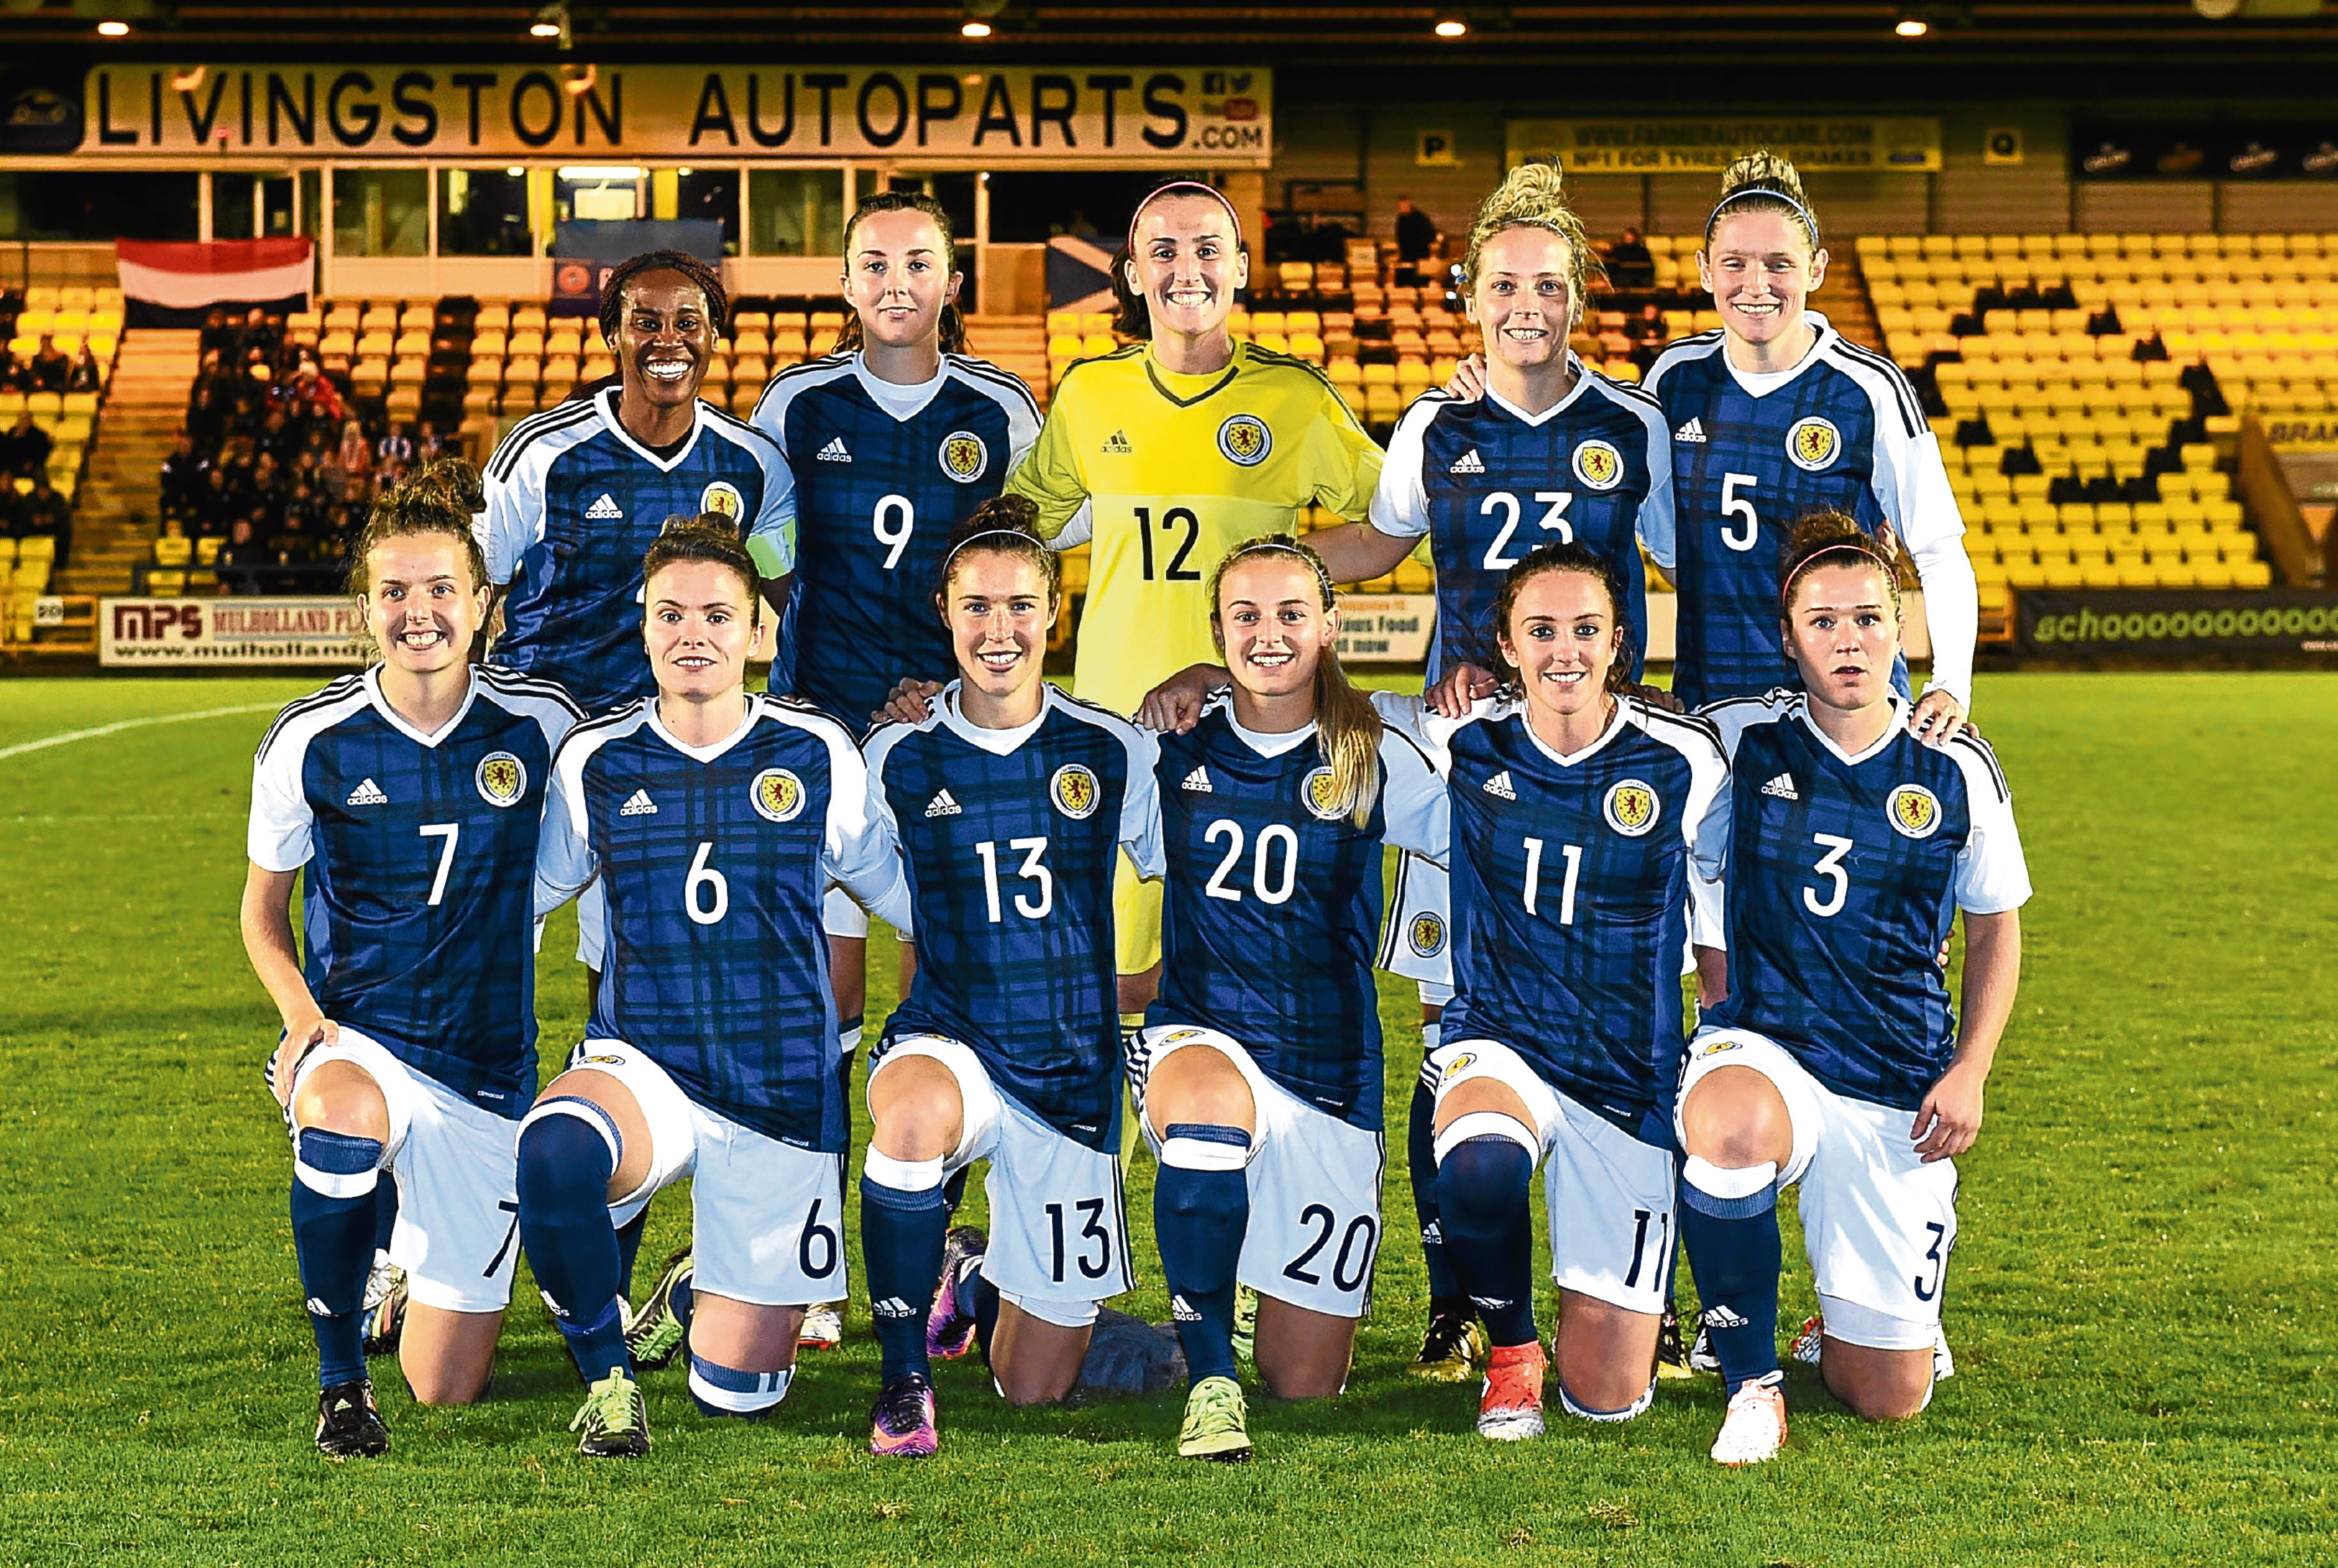 (Back L-R) Scotland's Ifeoma Dieke, Caroline Weir, Scotland goalkeeper Shannon Lynn, Joelle Murray and Leanne Ross (Front L-R) Scotland's Hayley Lauder, Joanne Love, Jane Ross, Kirsty Smith, Lisa Evans and Emma Mitchell